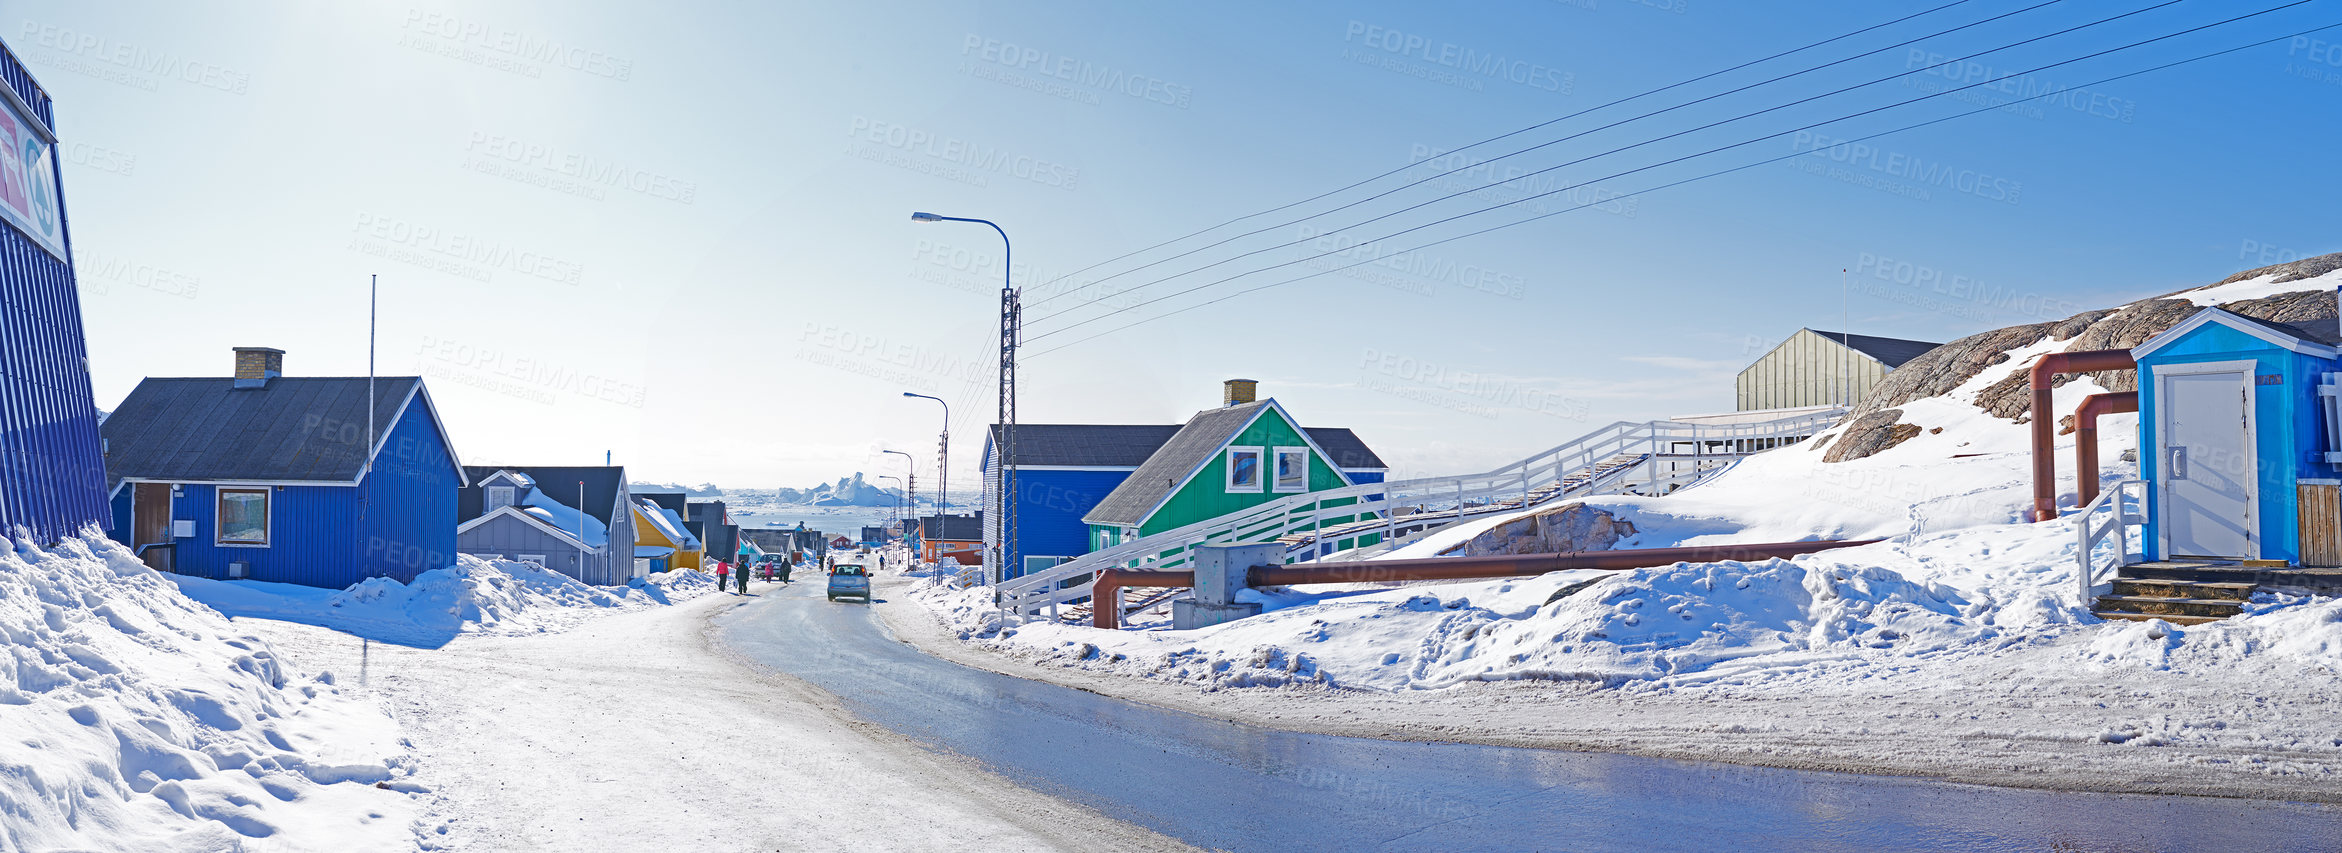 Buy stock photo The city of Ilulissat, Greenland, Denmark. The month of May